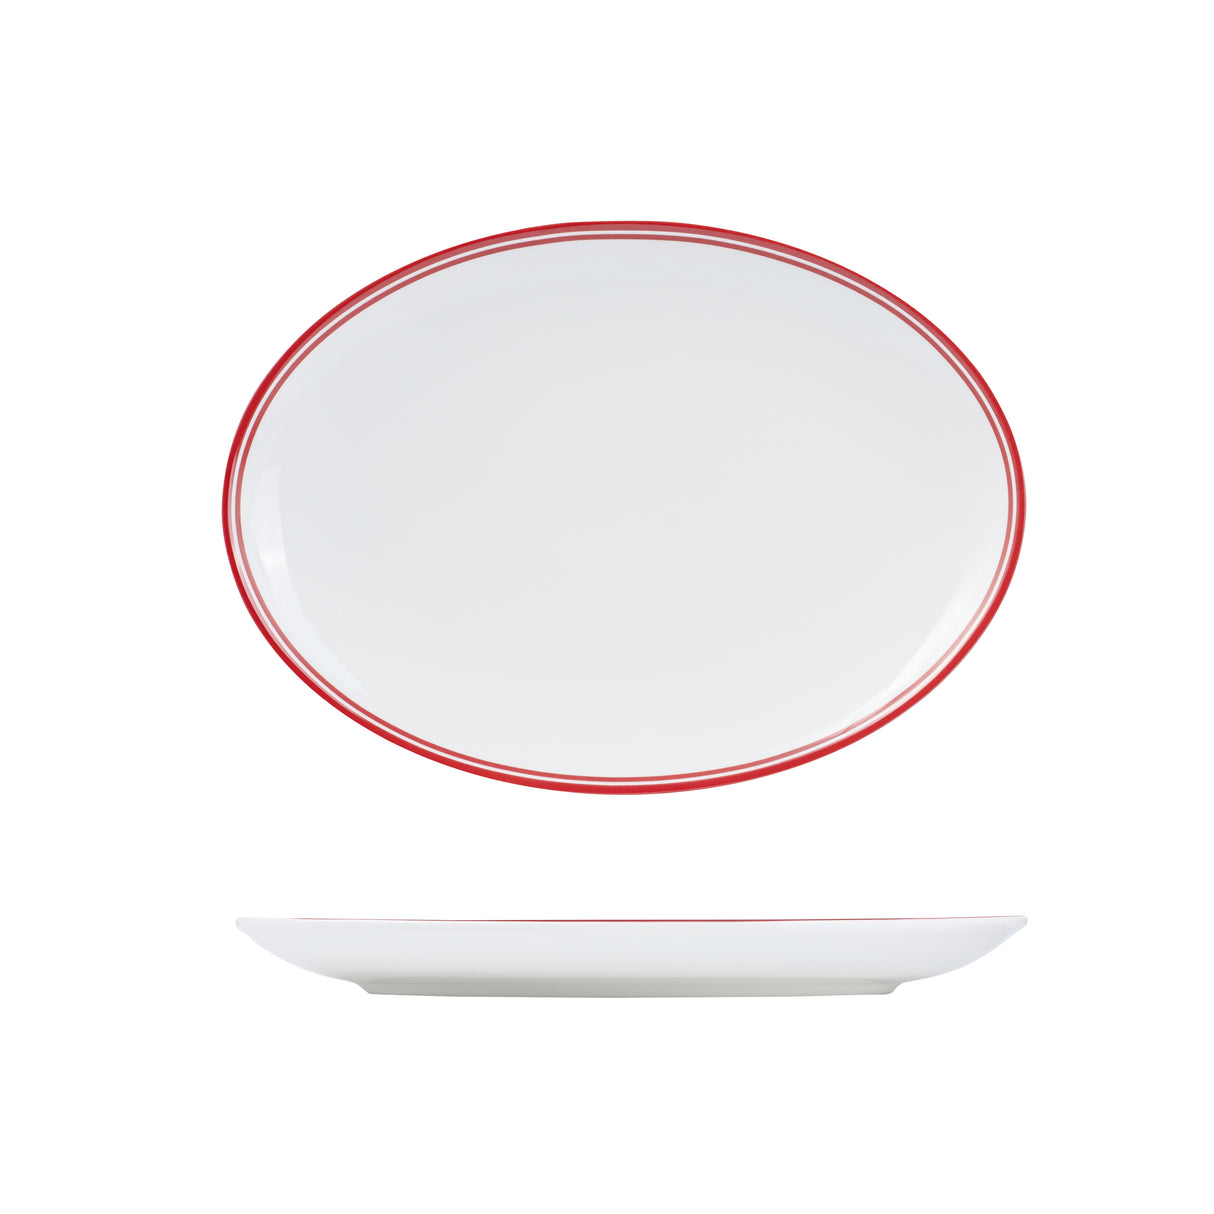 Nano Cru Oval Coupe Plate Red 320 X 230mm: Pack of 6